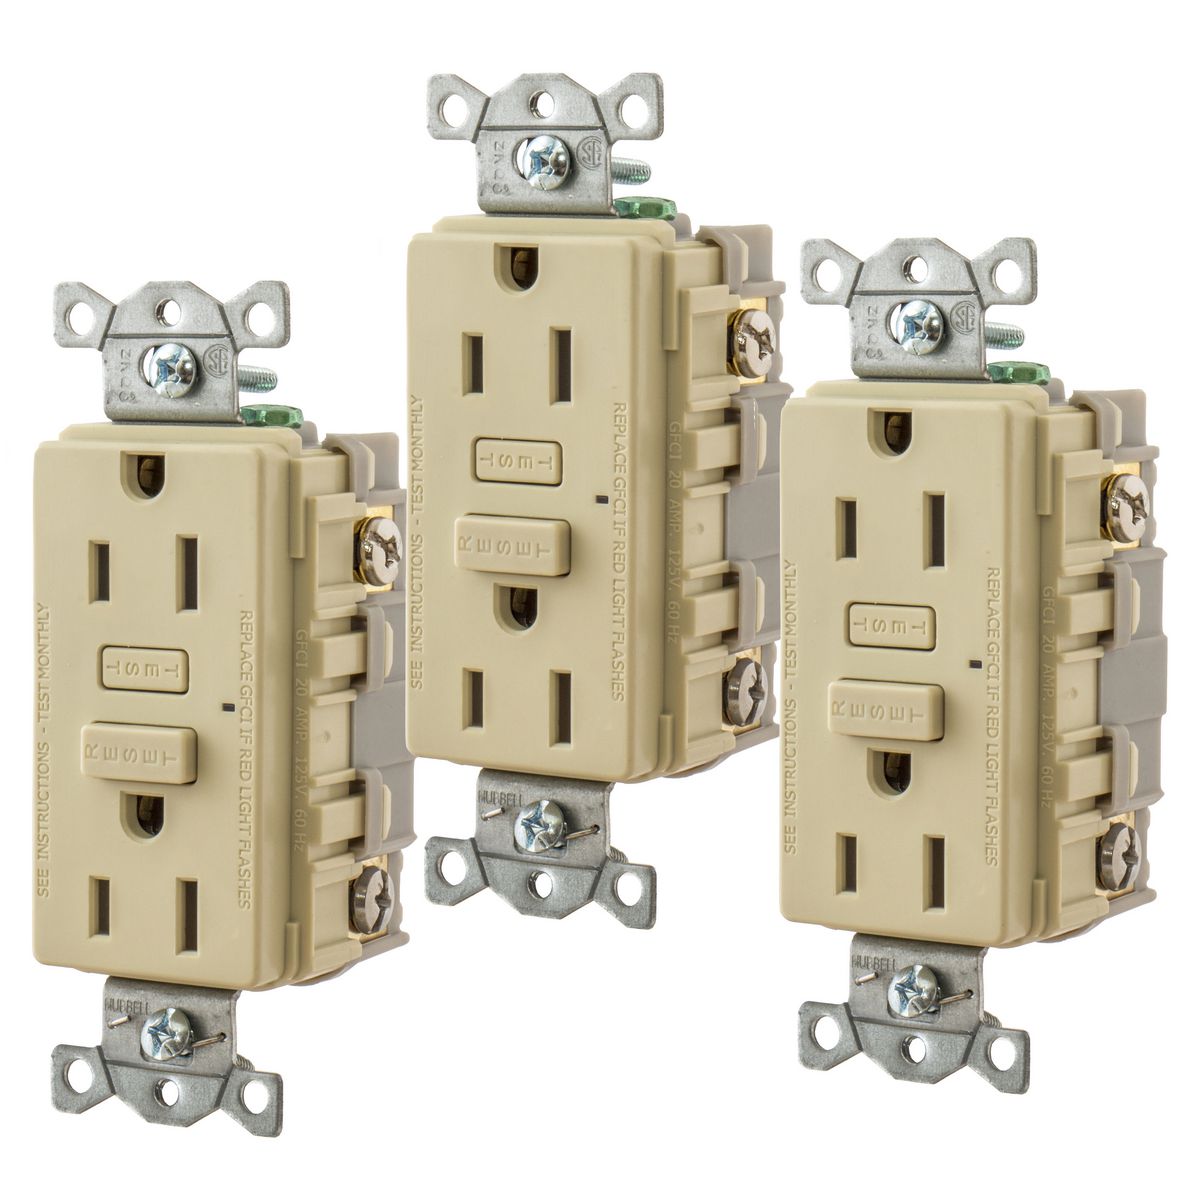 Hubbell Wiring Device Kellems, Power Protection Products, GFCIReceptacle, Duplex, Hubbell PRO, 15A 125V AC, 2-Pole 3-Wire Grounding,5-15R, Ivory, 3 Pack